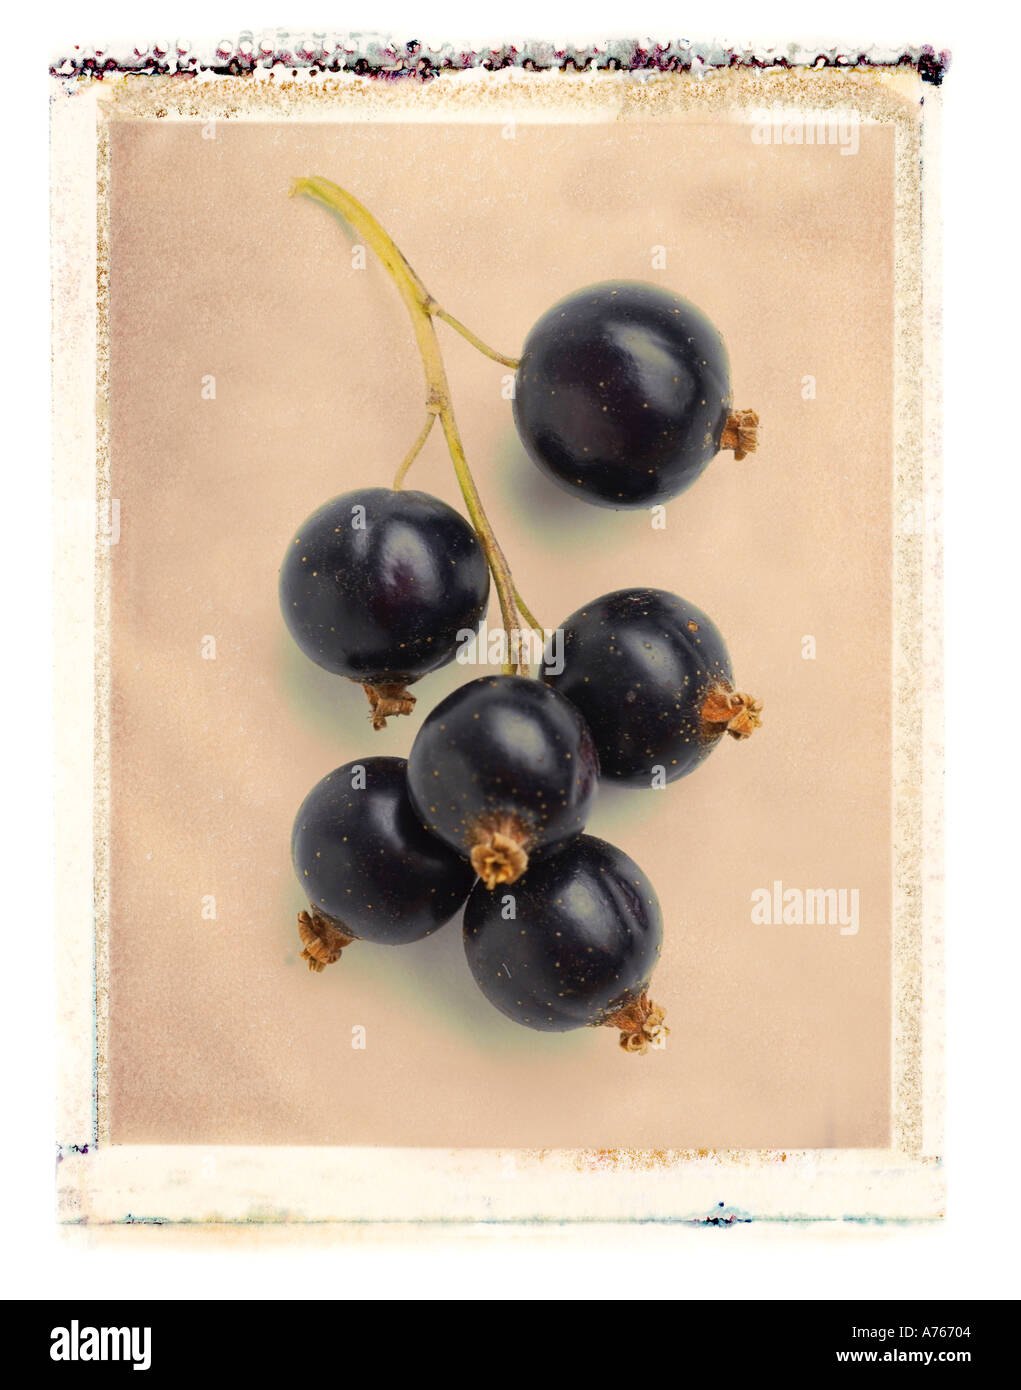 close up of black currants Stock Photo